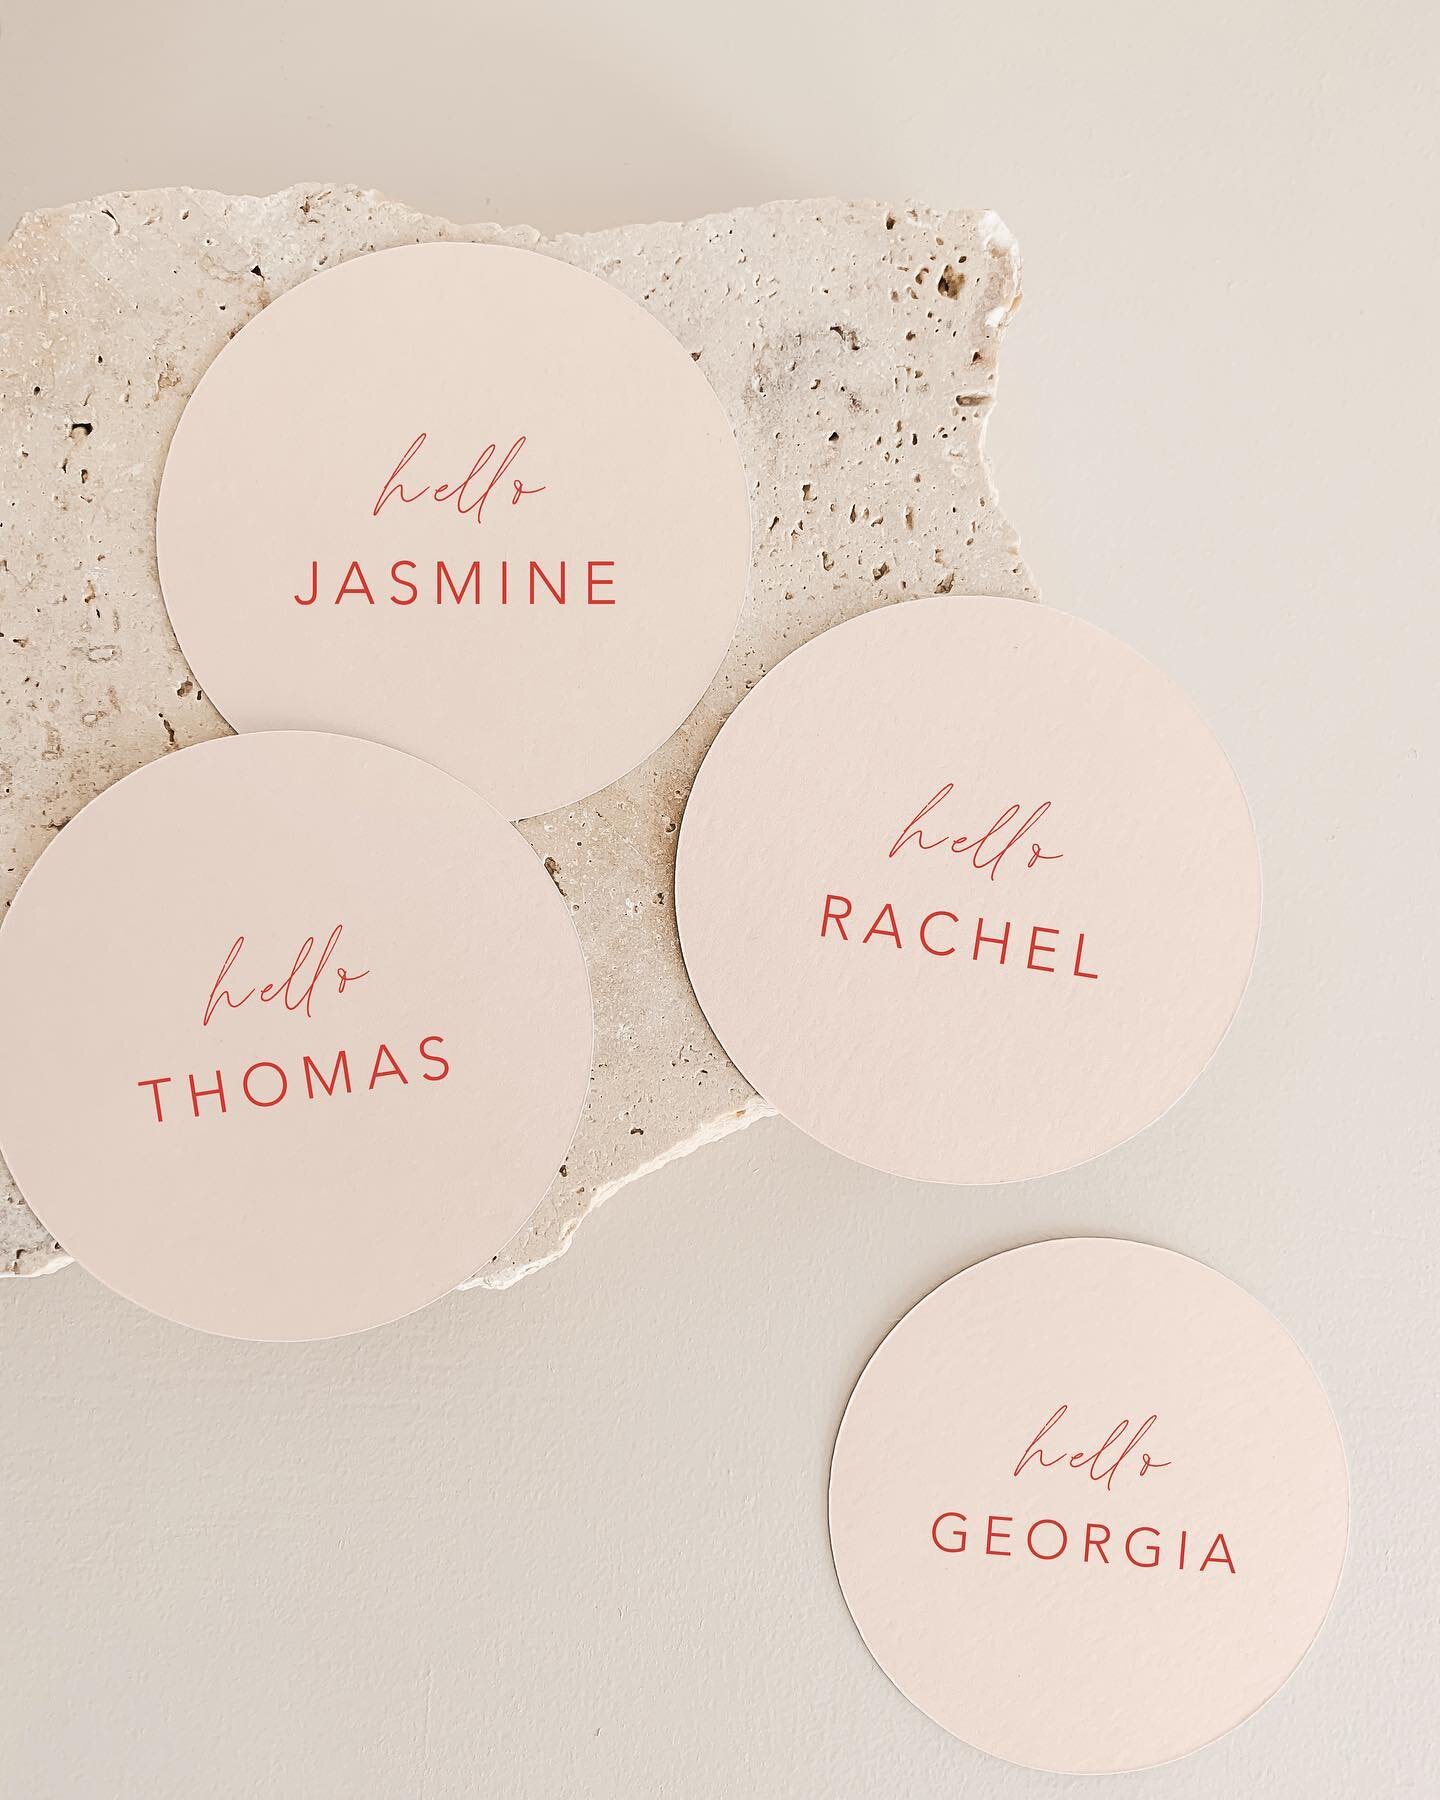 Blush pink place cards with a pop of red 🌹